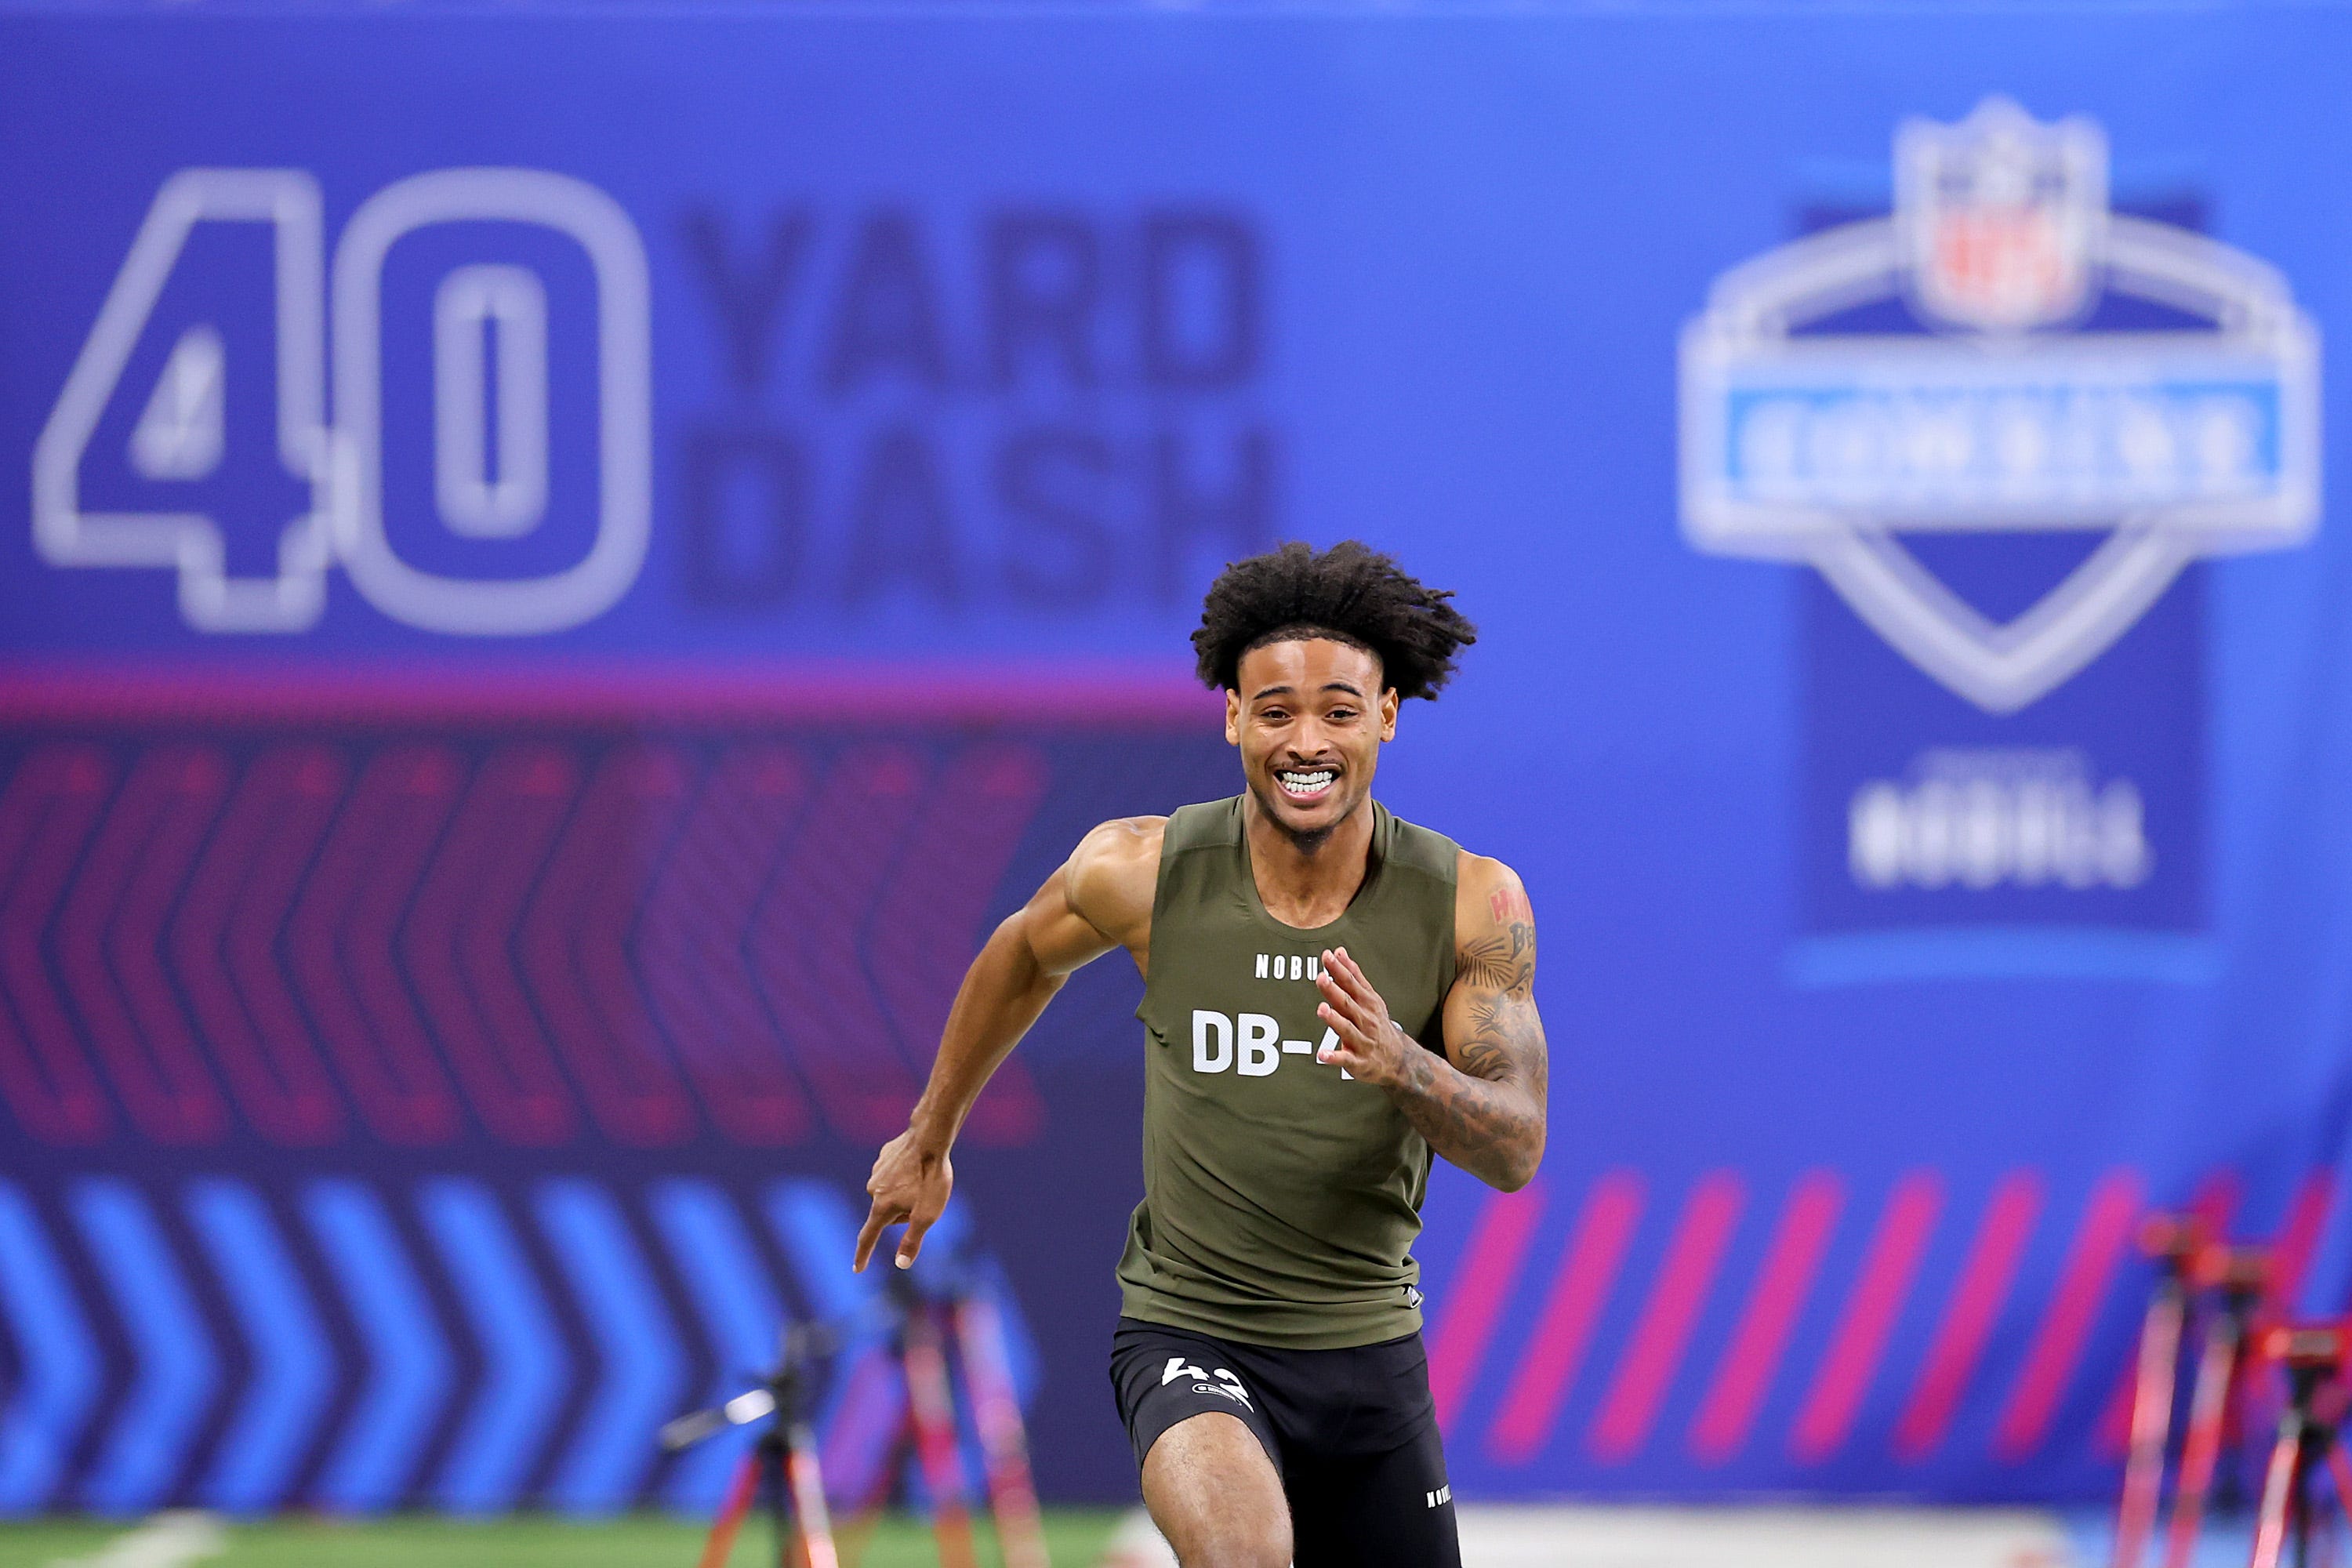 nate wiggins injured himself while running a 4.28 at the nfl combine and believes he could've run faster